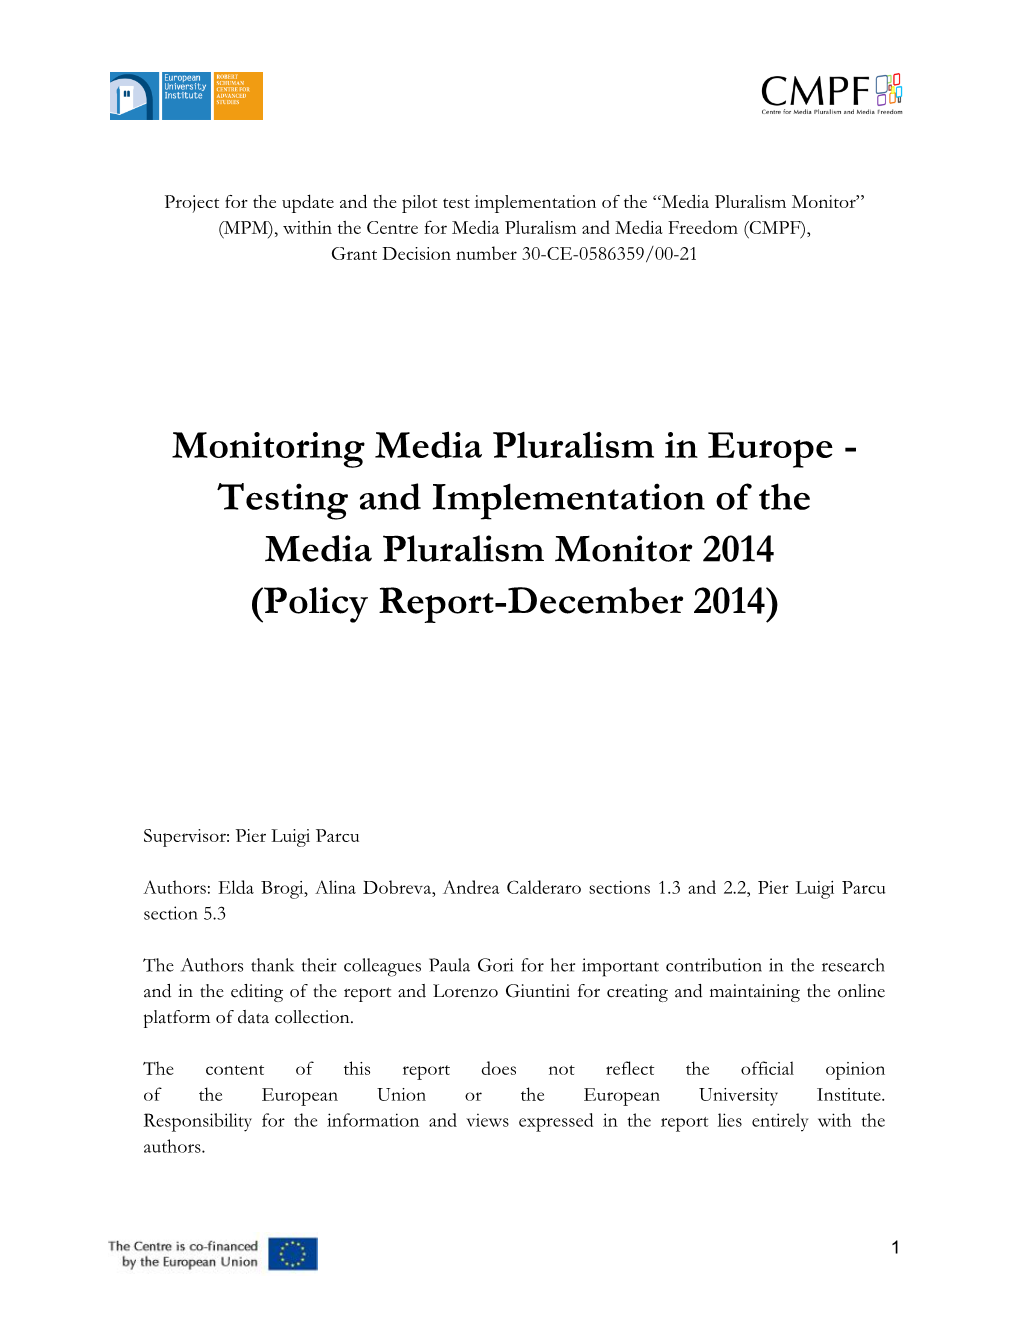 Testing and Implementation of the Media Pluralism Monitor 2014 (Policy Report-December 2014)